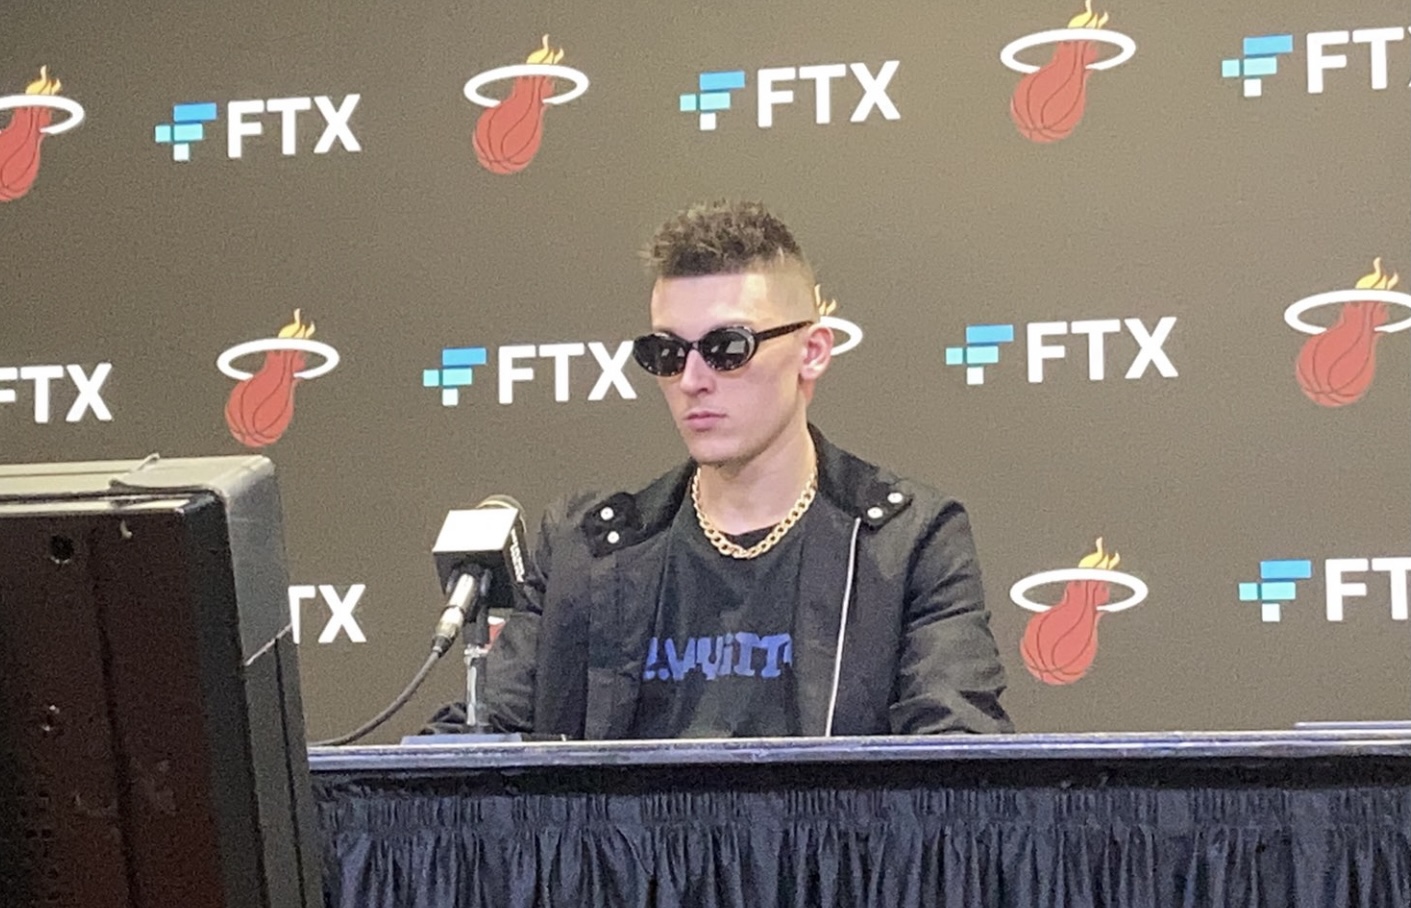 tyler herro post game outfit